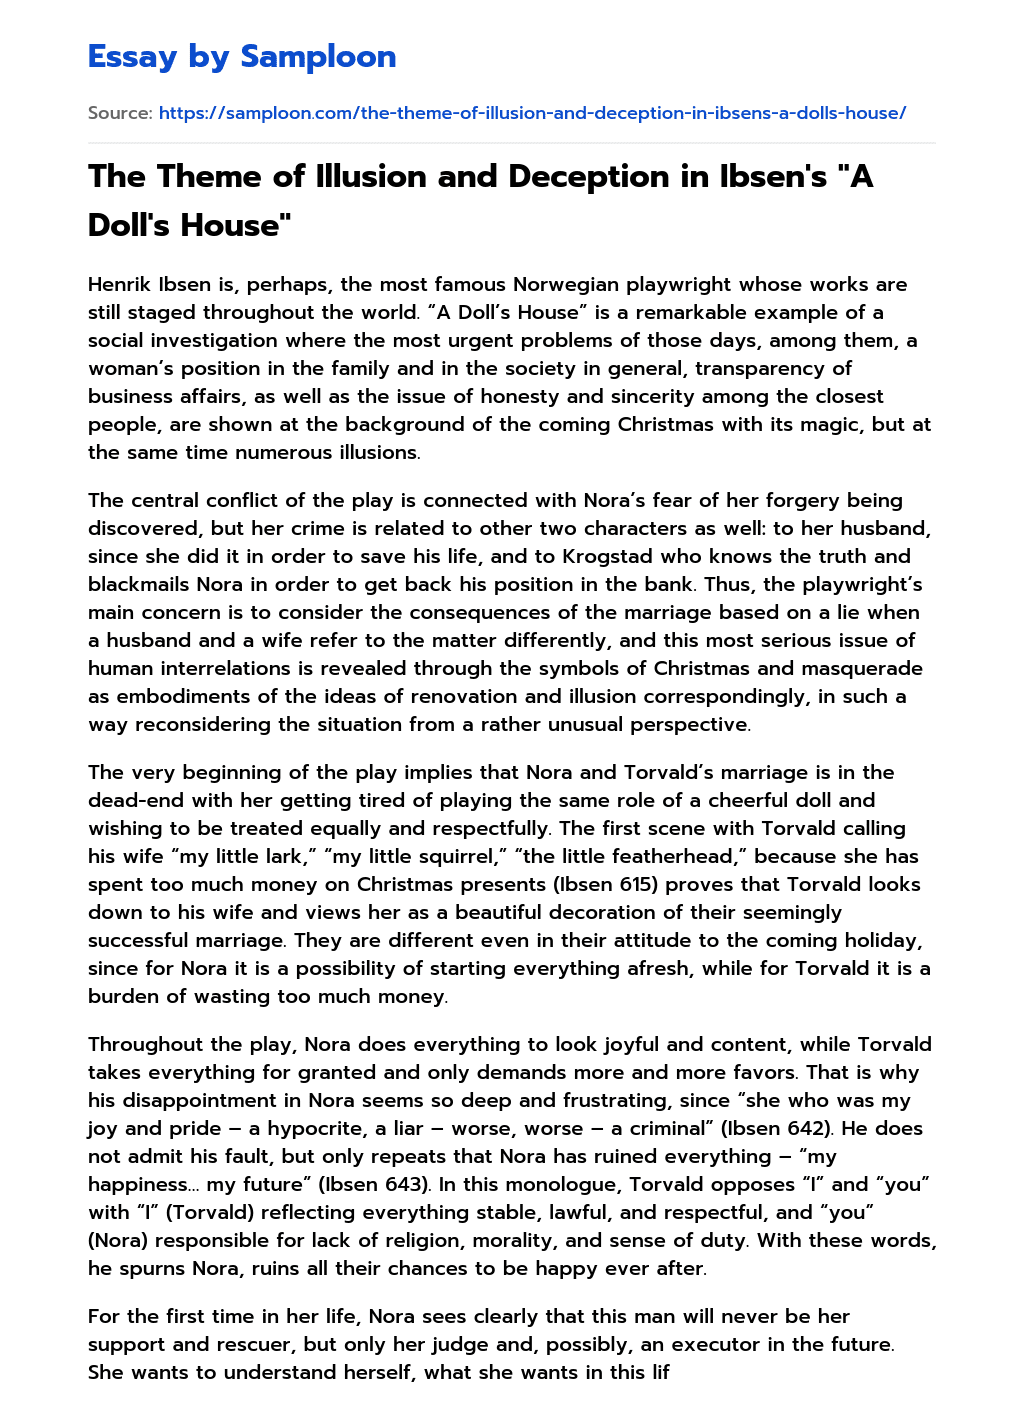 The Theme of Illusion and Deception in Ibsen’s “A Doll’s House” essay